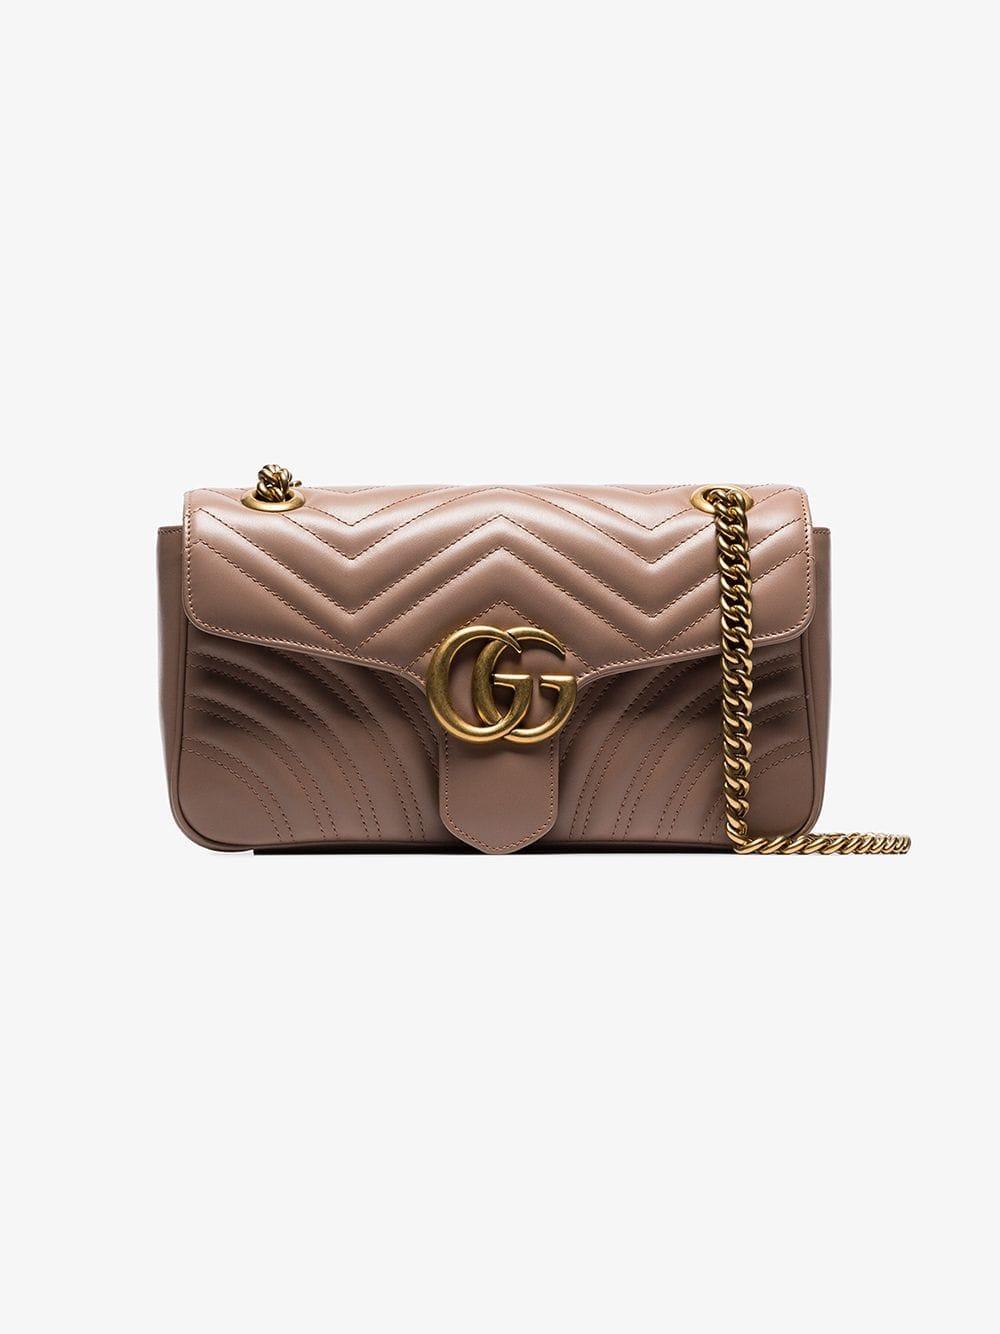 Gucci Quilted Bag - Fashion Style